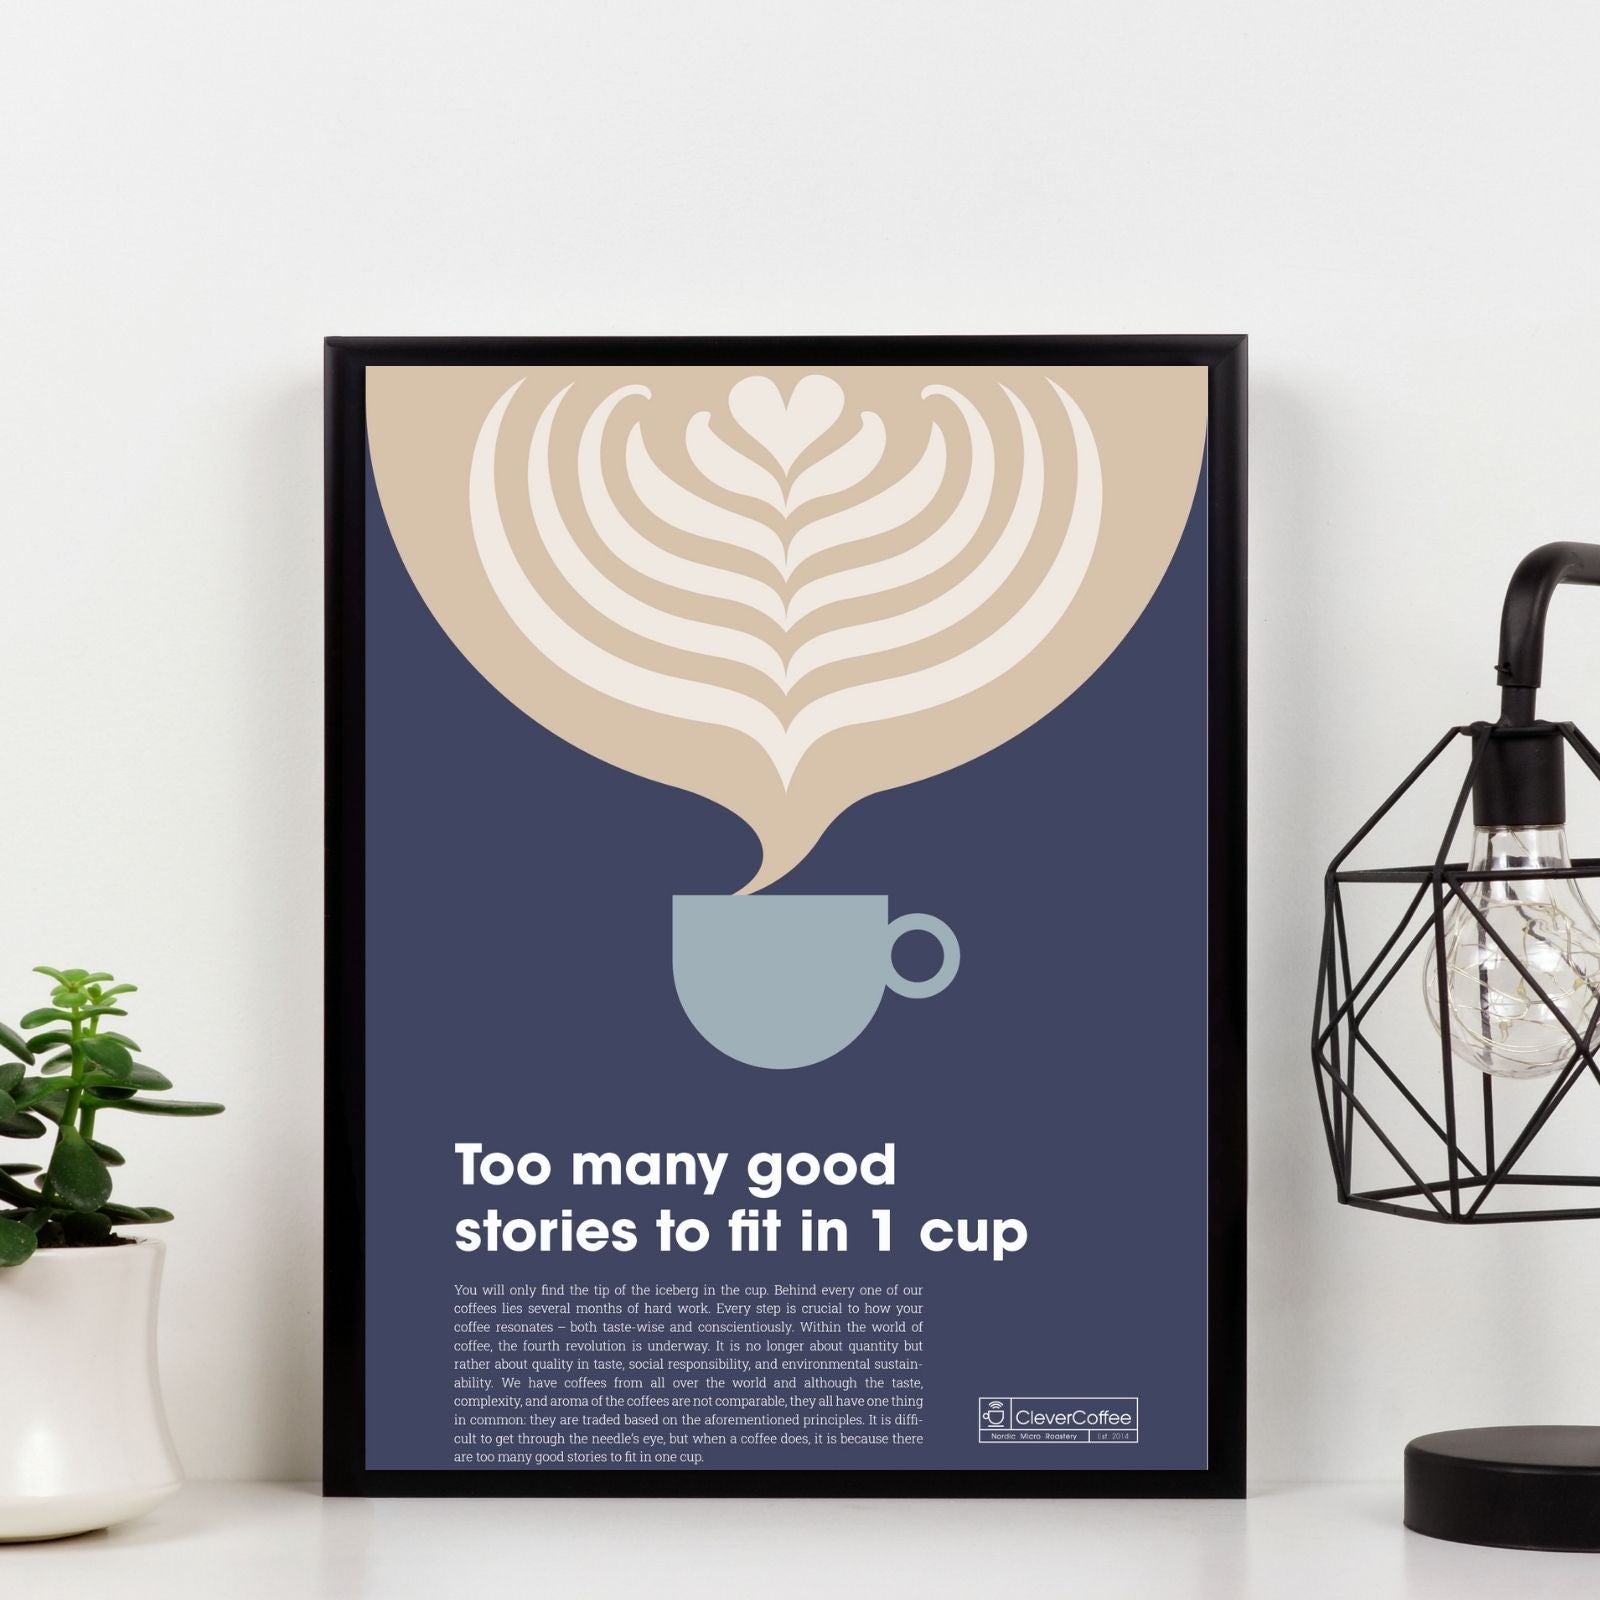 Plakat "Too many good stories to fit in 1 cup" 